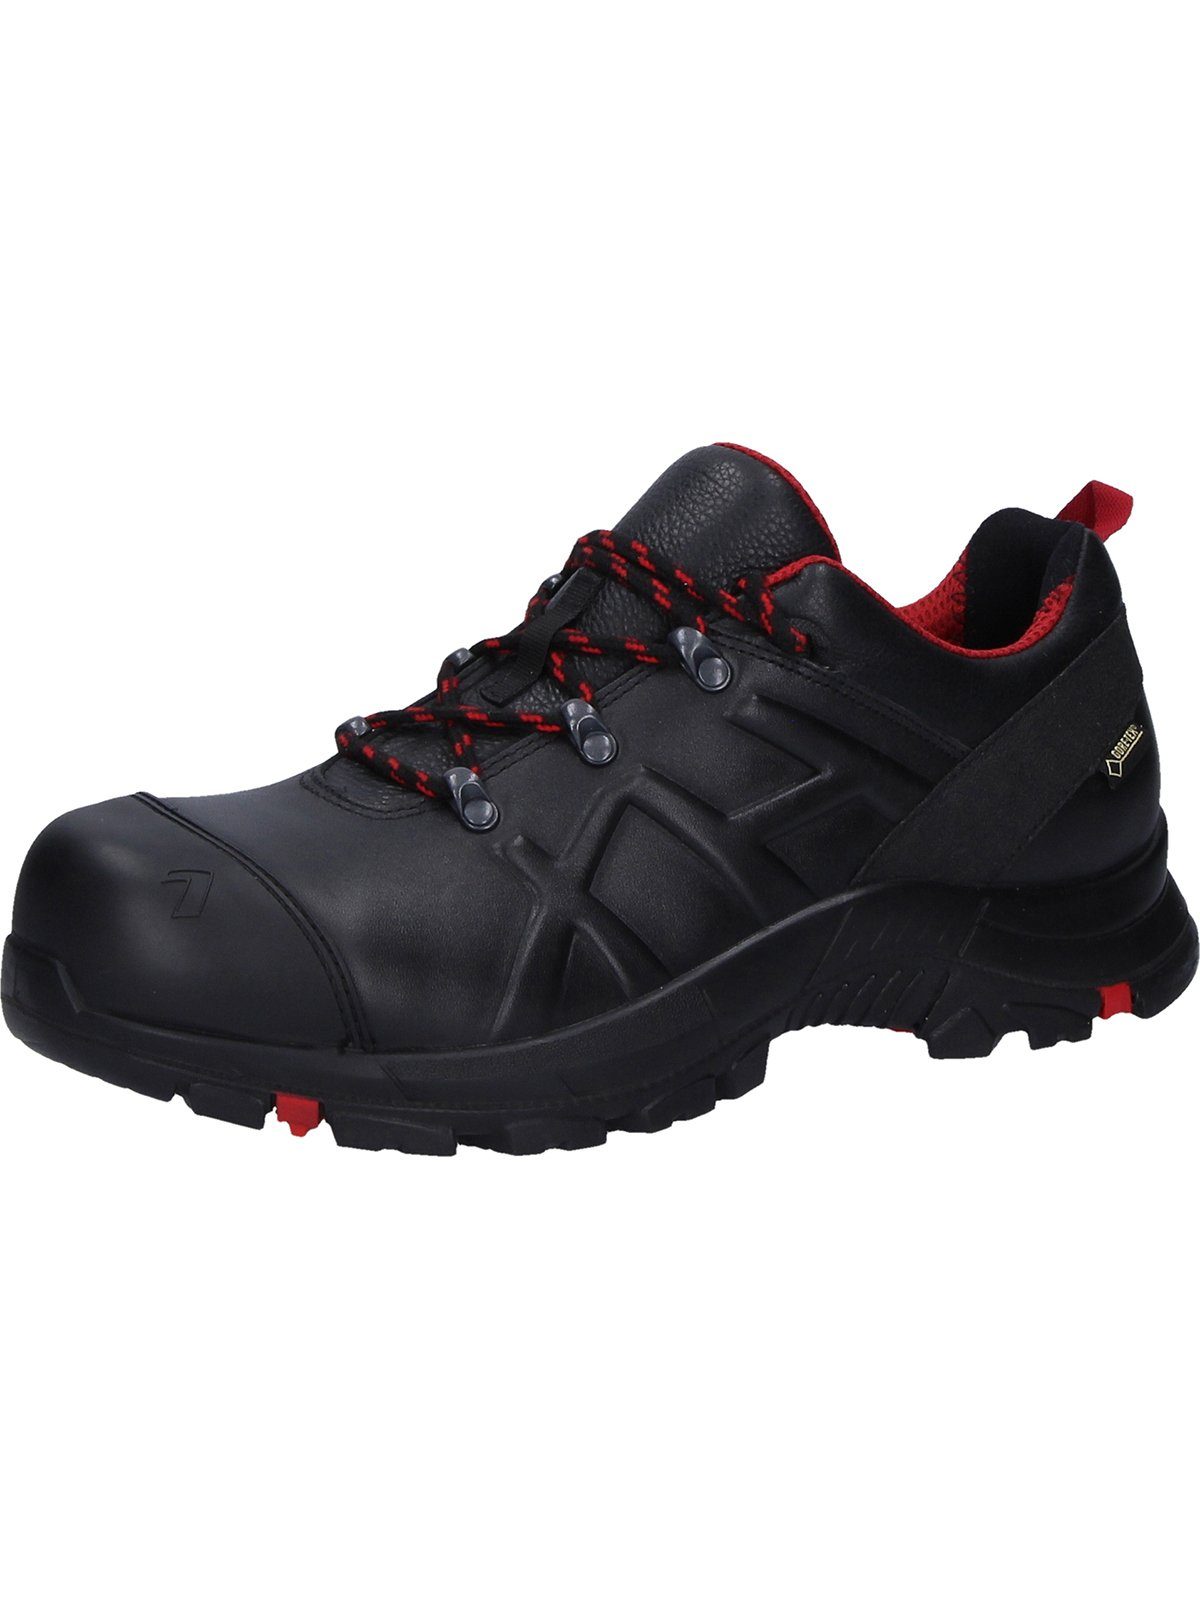 Safety Eagle Arbeitsschuh black/red low 54 Black haix